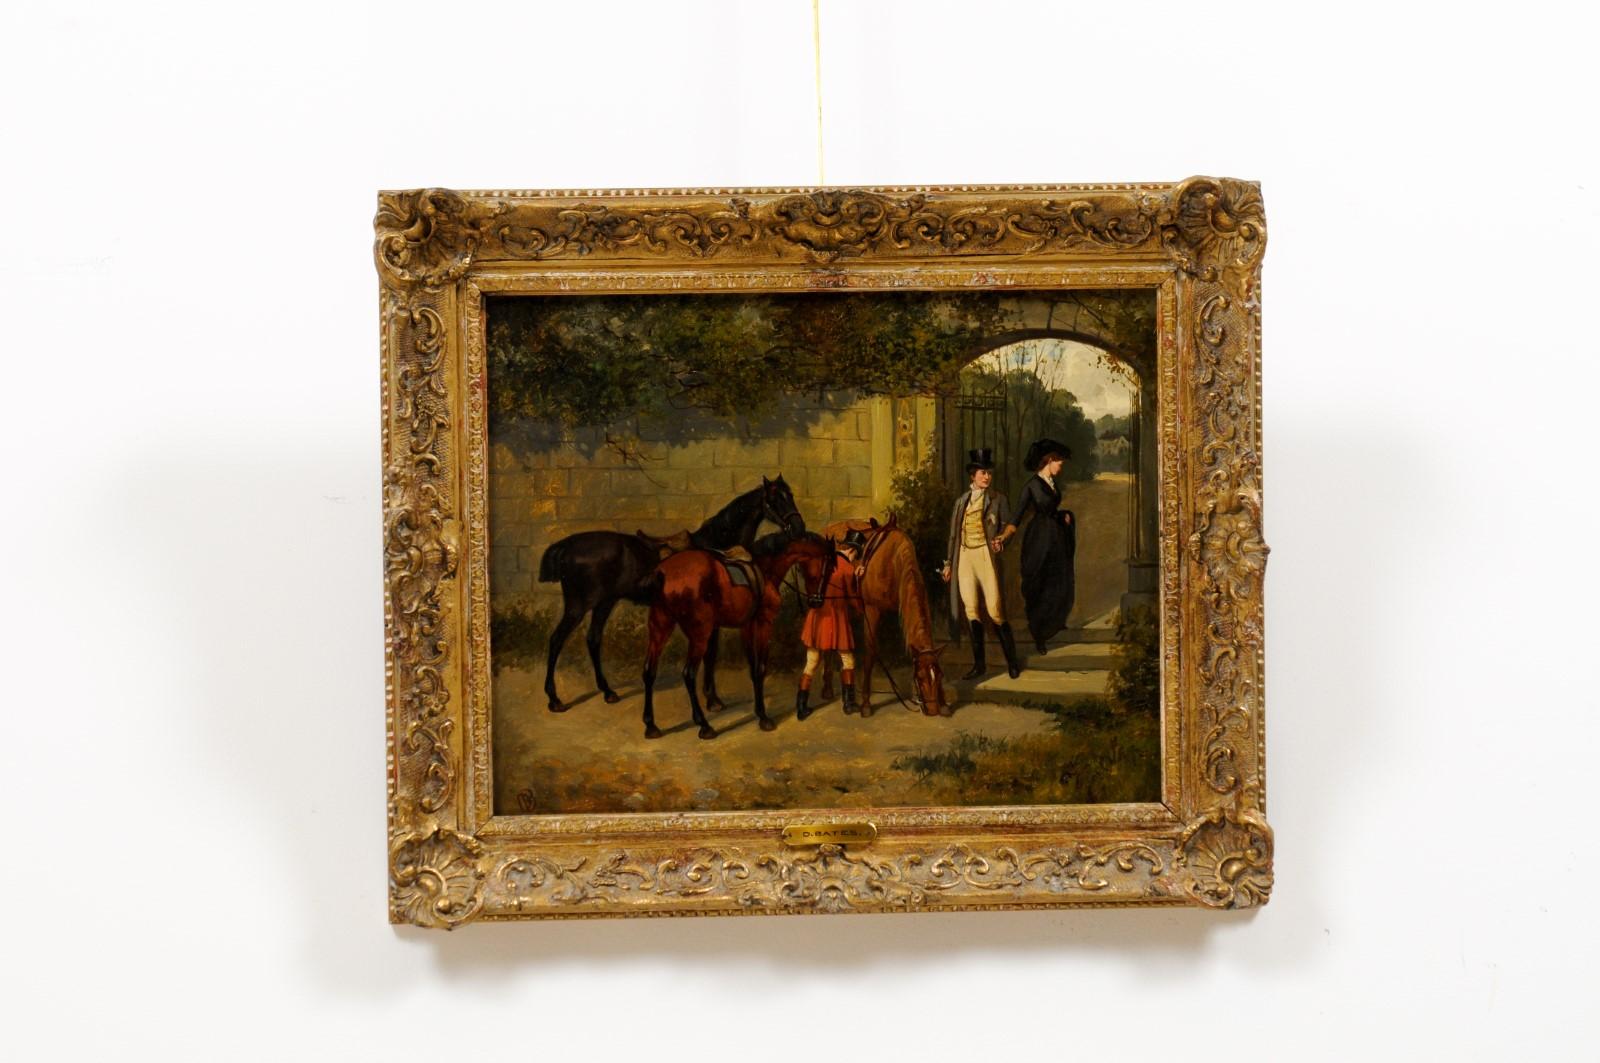 Gilt Framed Oil on Canvas Painting featuring Horses with Man & Woman, signed “D. Bates”, first half 20th Century Continental.